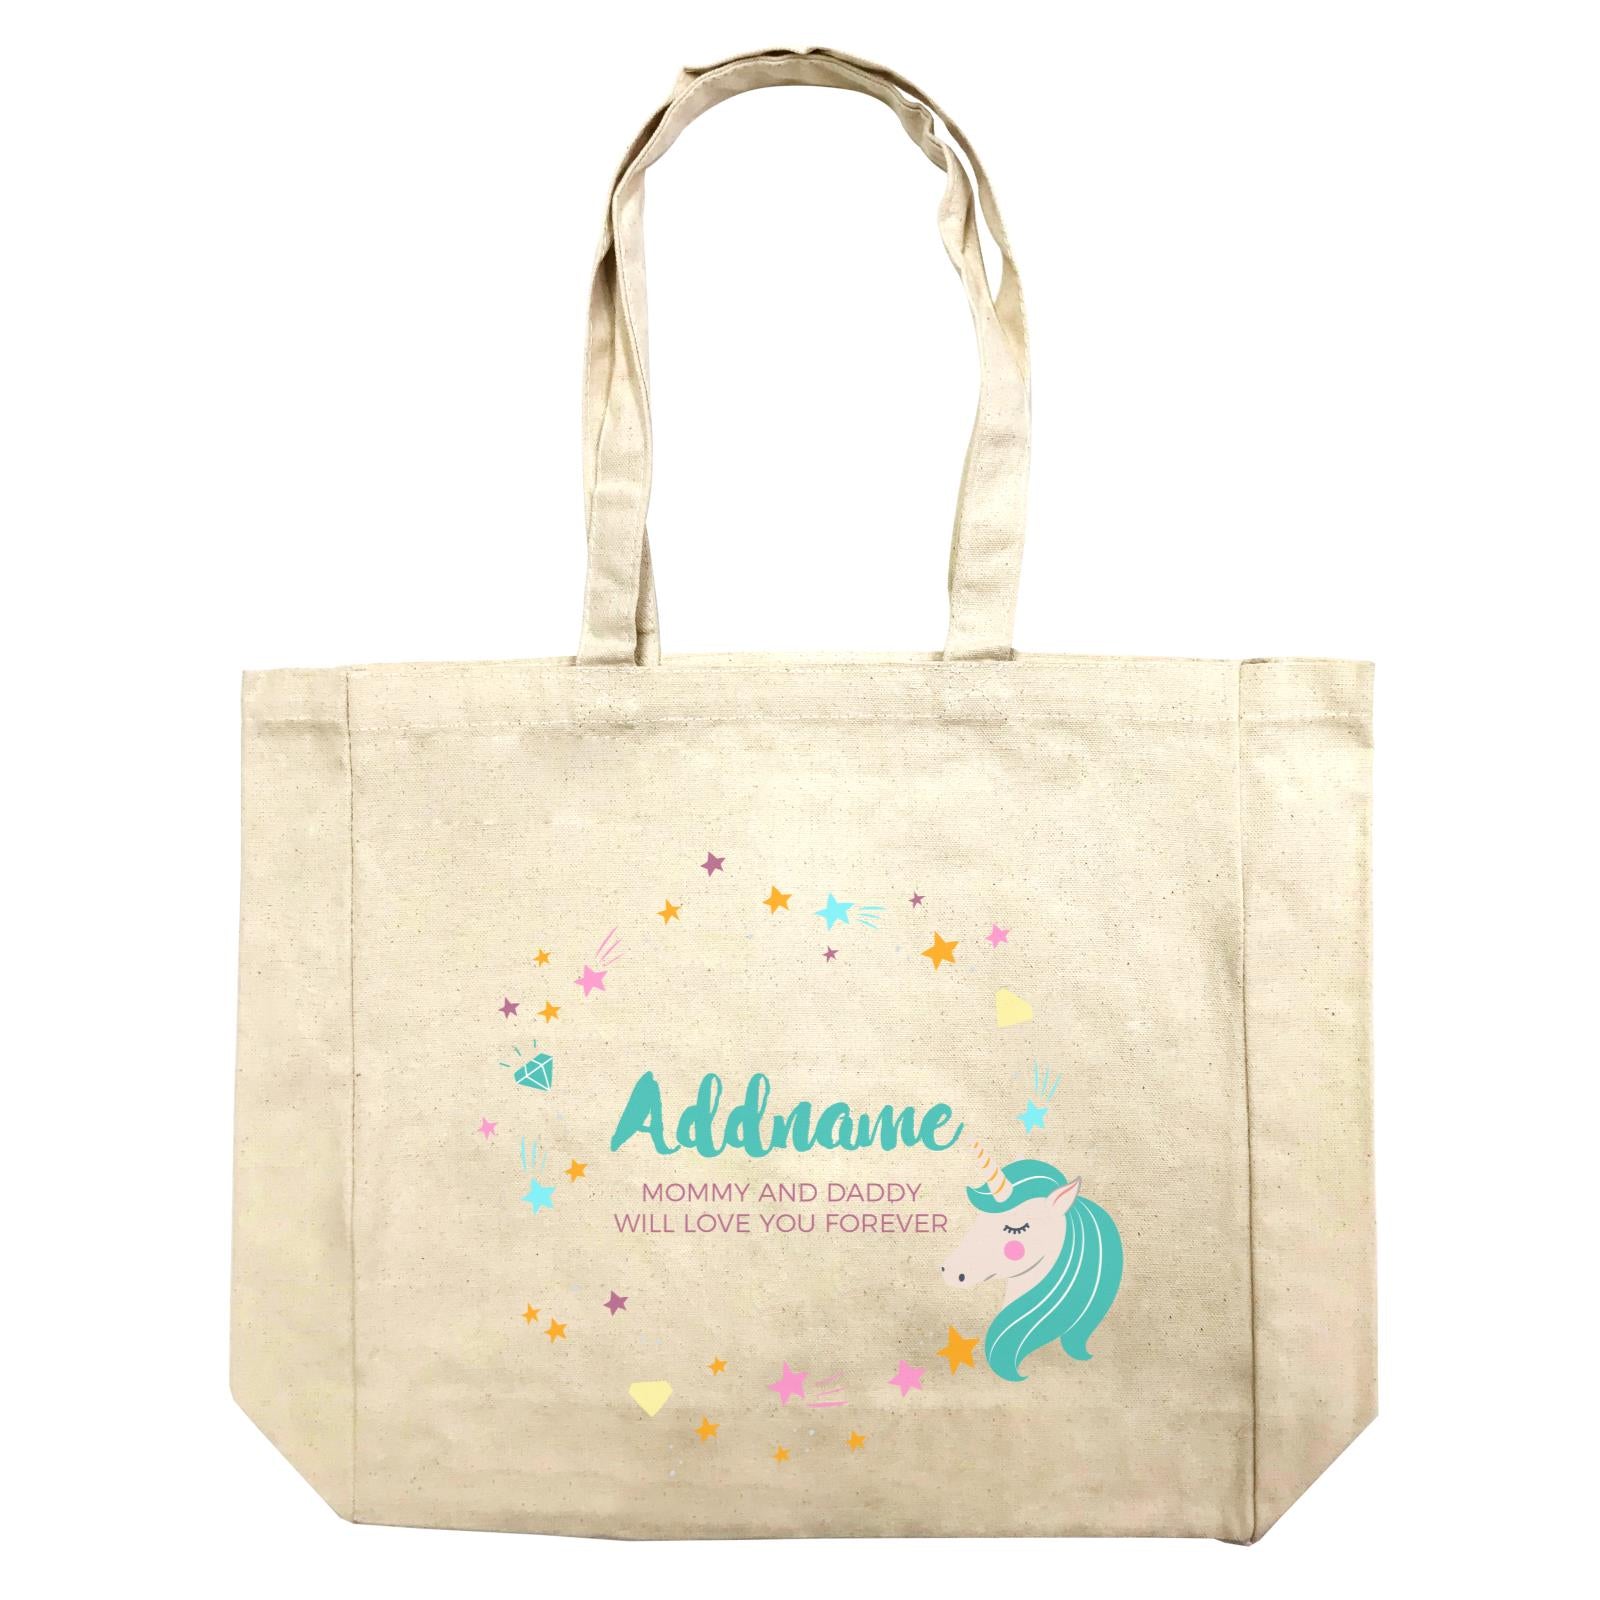 Cute Green Unicorn with Star and Diamond Elements Personalizable with Name and Date Shopping Bag